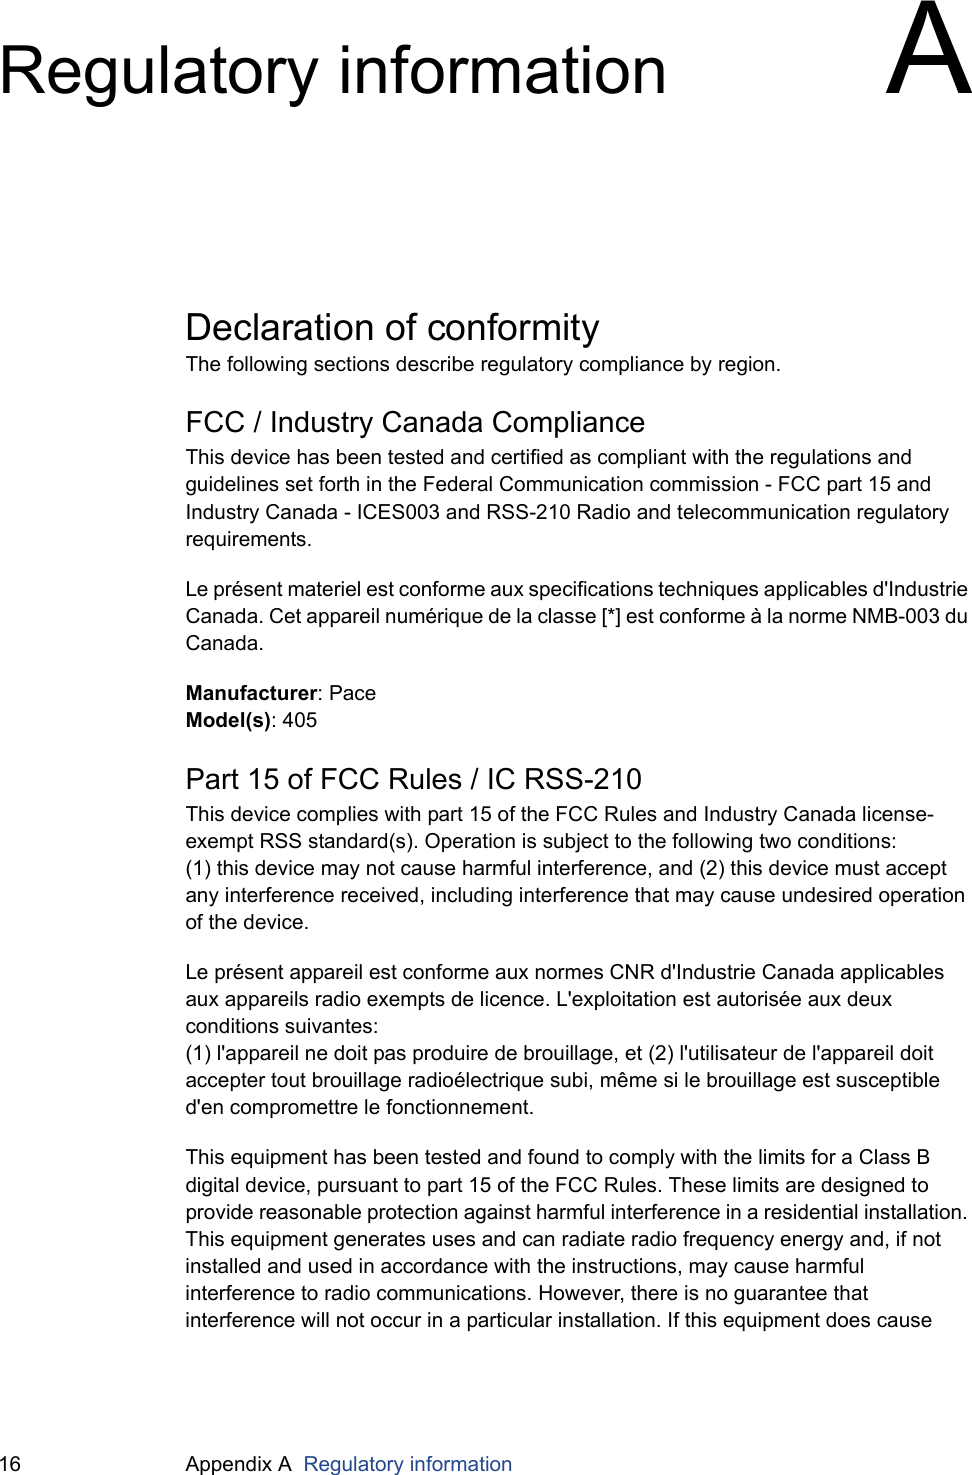 16 Appendix A  Regulatory informationRegulatory information ADeclaration of conformityThe following sections describe regulatory compliance by region.FCC / Industry Canada ComplianceThis device has been tested and certified as compliant with the regulations and guidelines set forth in the Federal Communication commission - FCC part 15 and Industry Canada - ICES003 and RSS-210 Radio and telecommunication regulatory requirements.Le présent materiel est conforme aux specifications techniques applicables d&apos;Industrie Canada. Cet appareil numérique de la classe [*] est conforme à la norme NMB-003 du Canada.Manufacturer: PaceModel(s): 405Part 15 of FCC Rules / IC RSS-210This device complies with part 15 of the FCC Rules and Industry Canada license-exempt RSS standard(s). Operation is subject to the following two conditions:(1) this device may not cause harmful interference, and (2) this device must accept any interference received, including interference that may cause undesired operation of the device.Le présent appareil est conforme aux normes CNR d&apos;Industrie Canada applicables aux appareils radio exempts de licence. L&apos;exploitation est autorisée aux deux conditions suivantes:(1) l&apos;appareil ne doit pas produire de brouillage, et (2) l&apos;utilisateur de l&apos;appareil doit accepter tout brouillage radioélectrique subi, même si le brouillage est susceptible d&apos;en compromettre le fonctionnement.This equipment has been tested and found to comply with the limits for a Class B digital device, pursuant to part 15 of the FCC Rules. These limits are designed to provide reasonable protection against harmful interference in a residential installation. This equipment generates uses and can radiate radio frequency energy and, if not installed and used in accordance with the instructions, may cause harmful interference to radio communications. However, there is no guarantee that interference will not occur in a particular installation. If this equipment does cause 